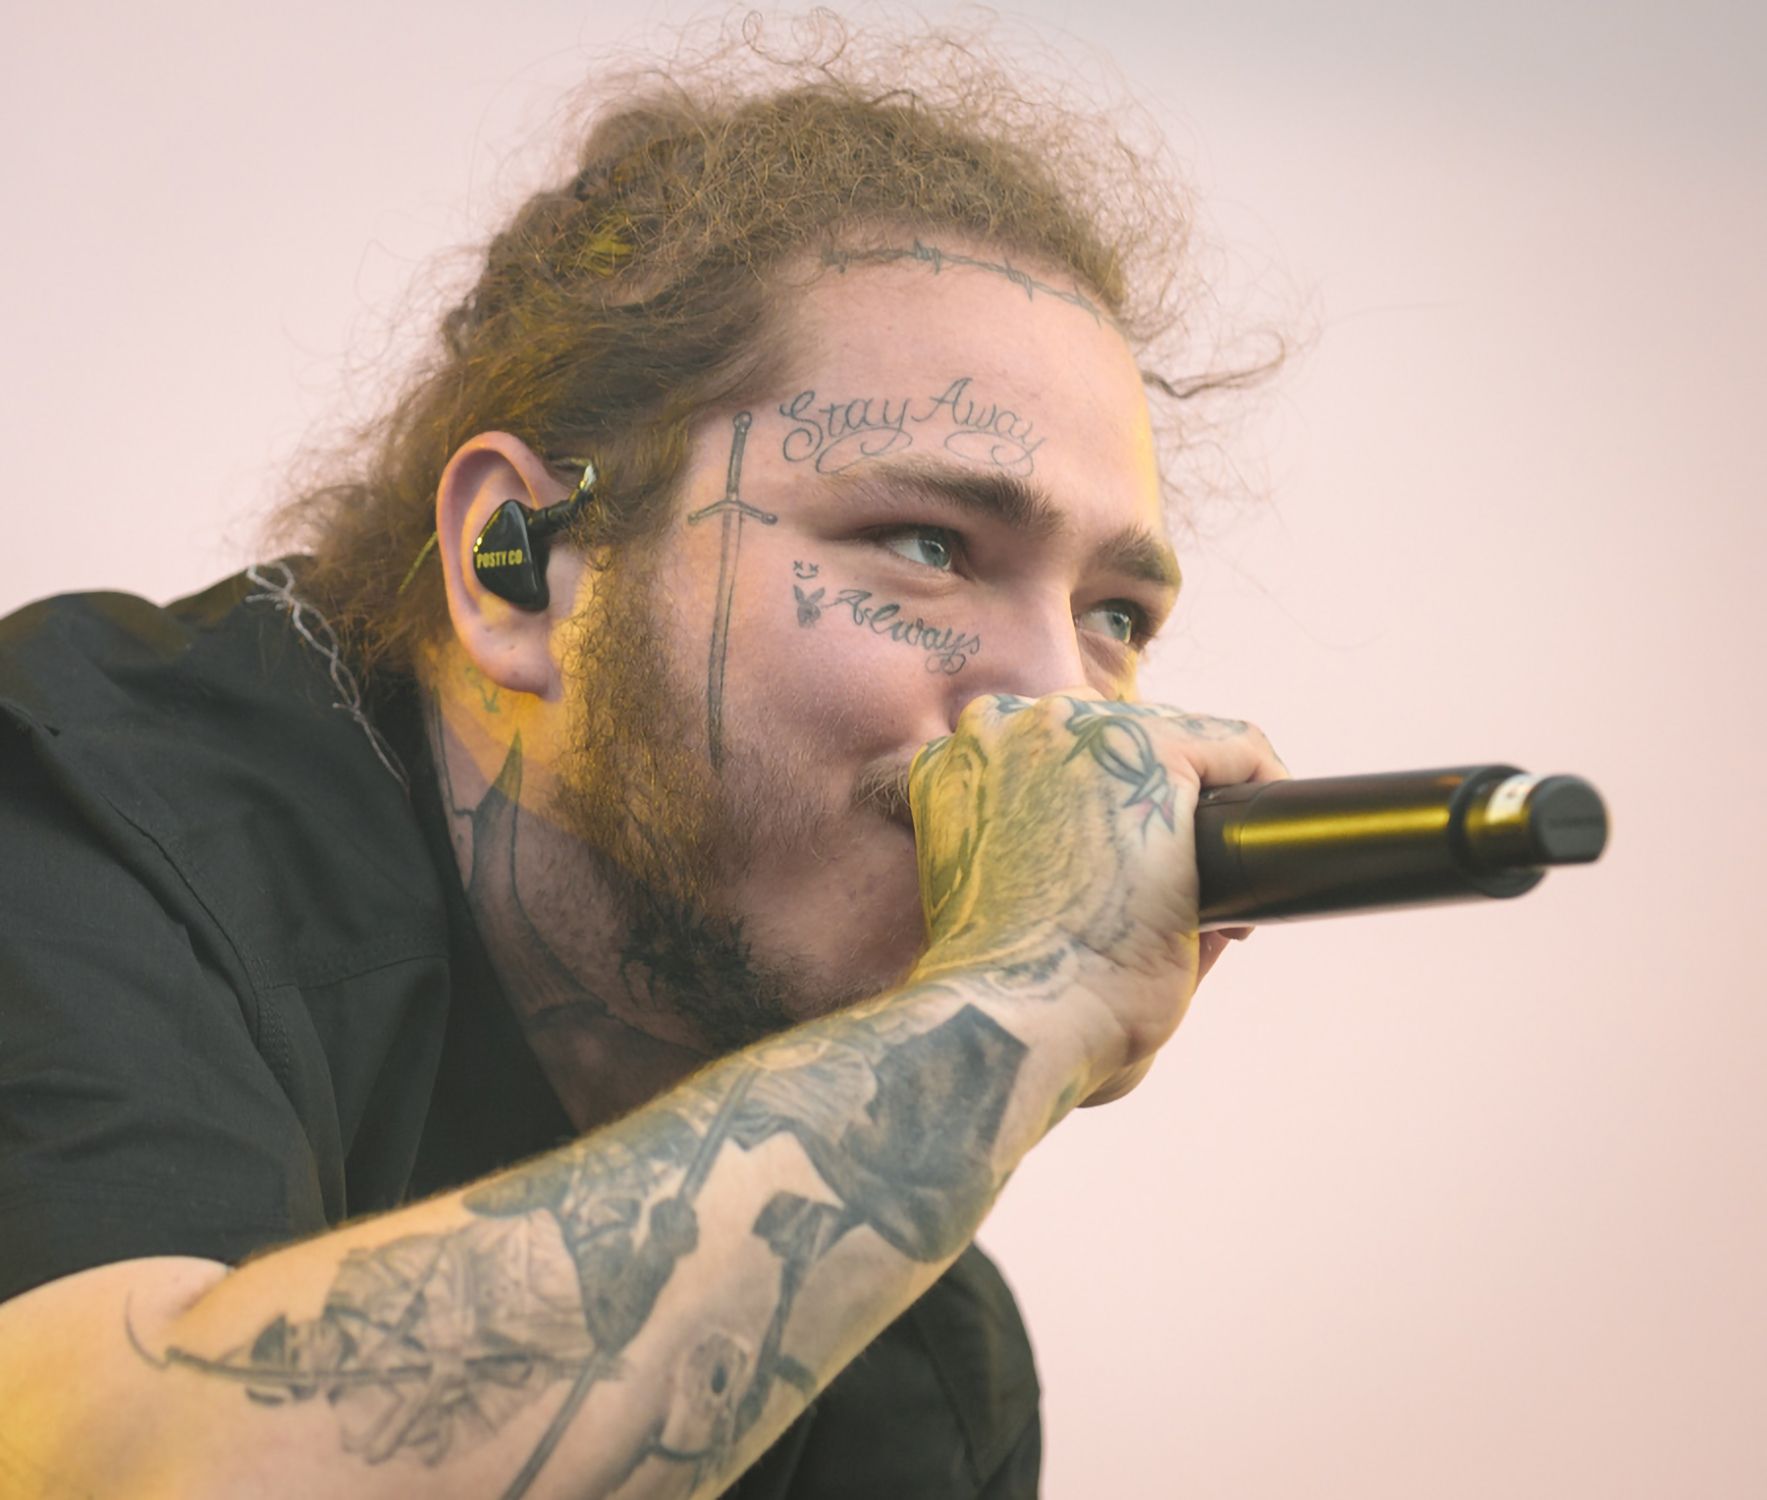 Post Malone, photo by Torre Saetre, under CC 2.0